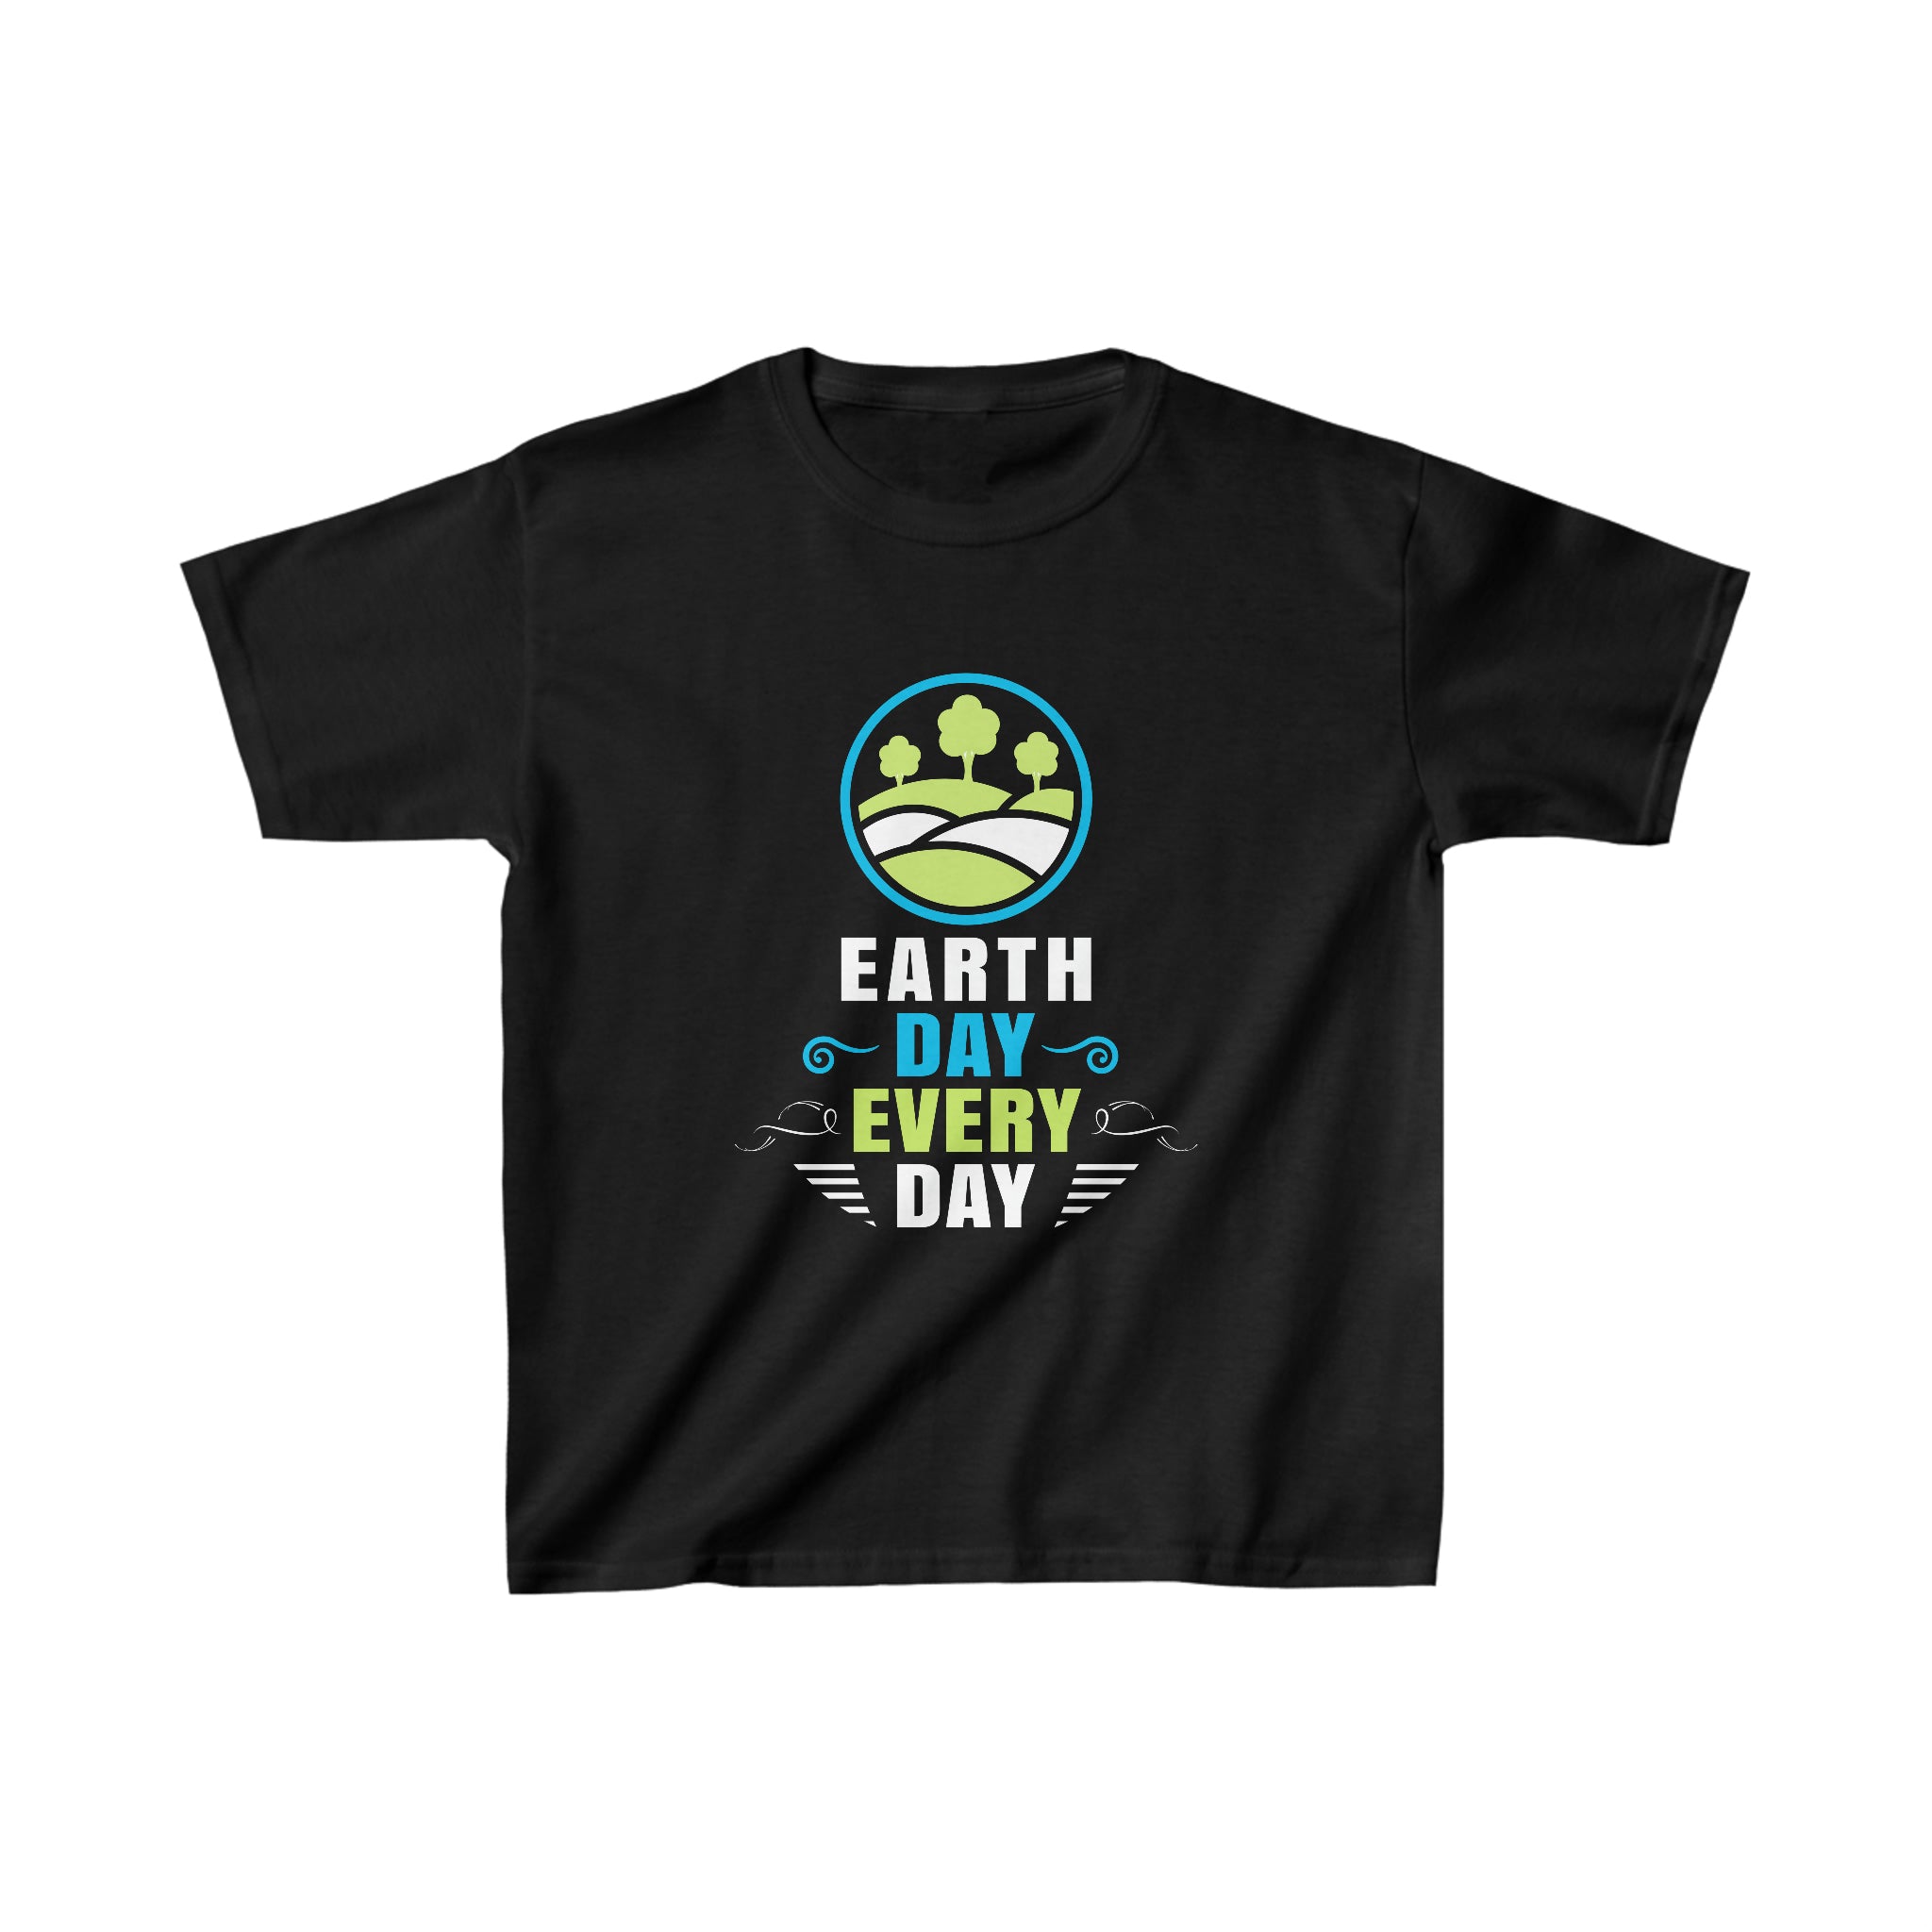 Earth Day Every Day Earth Day Shirts Save the Planet Shirts for Boys